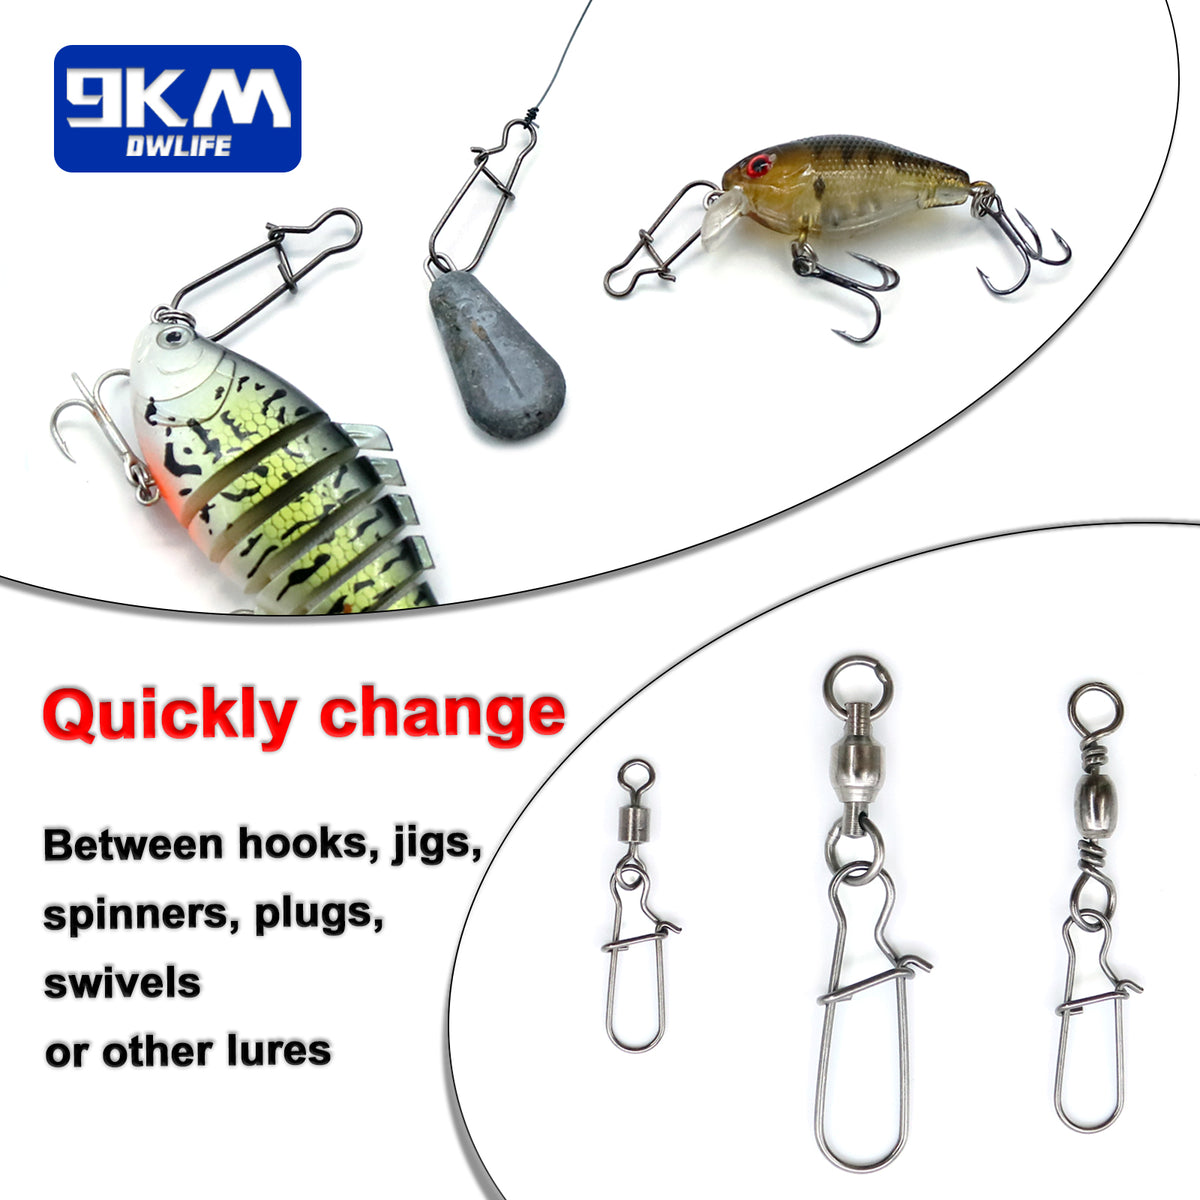 Fishing Snaps Fast Lock Clips Stainless Steel Fishing Connector Tackle –  9km-dwlife